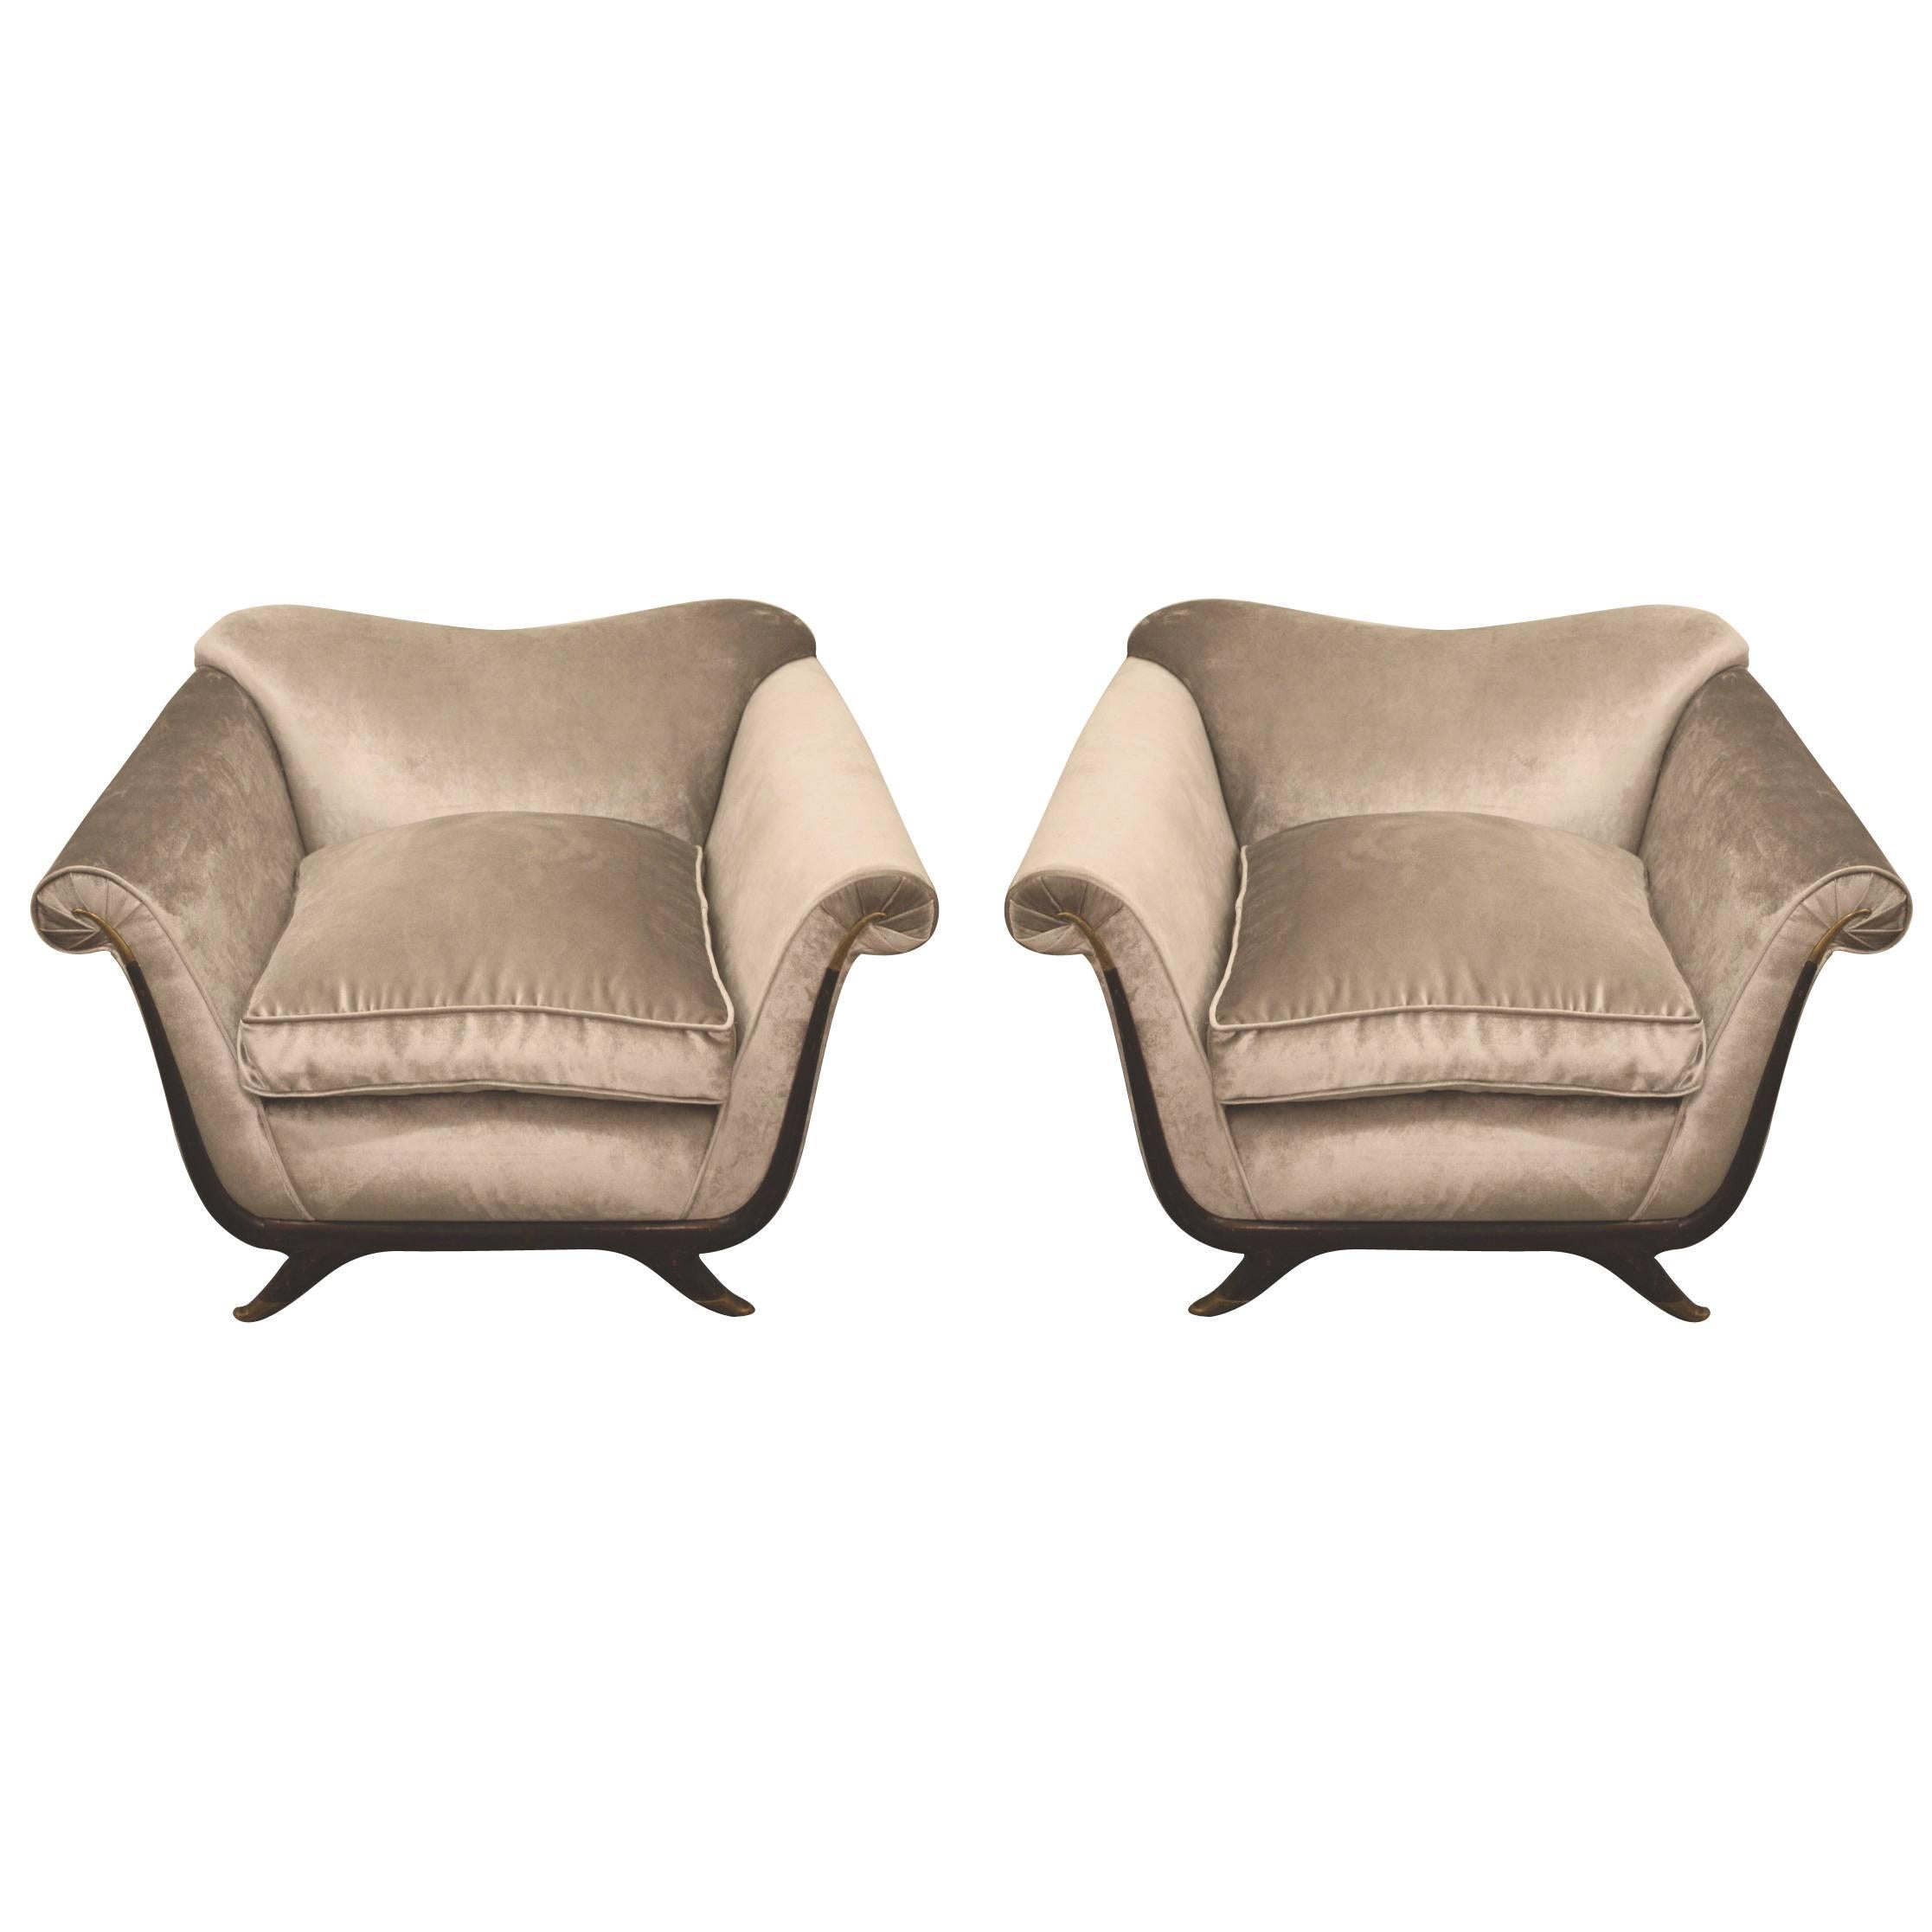 A pair of stunning armchairs in original green silk, with brass sabot on the feet and decorative brass finish on the arms. Designed by G. Ulrich, Italian, 1940s.